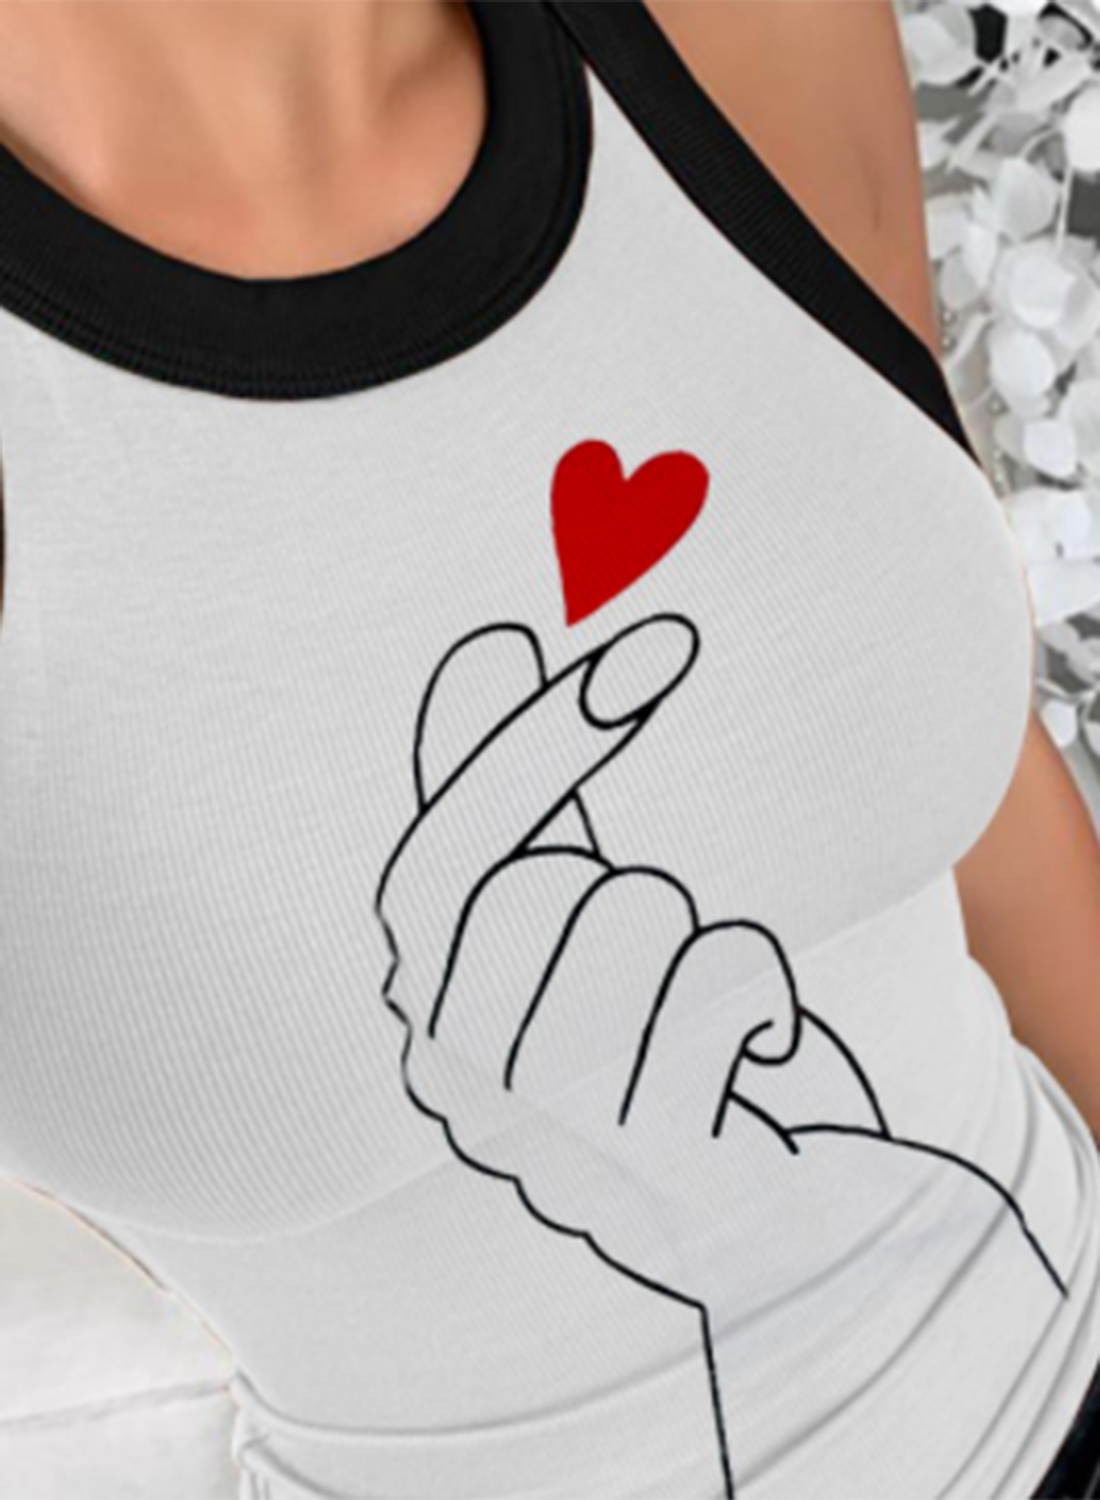 Women's Tank Tops Color Block Heart-shaped Sleeveless Round Neck Casual Tank Top